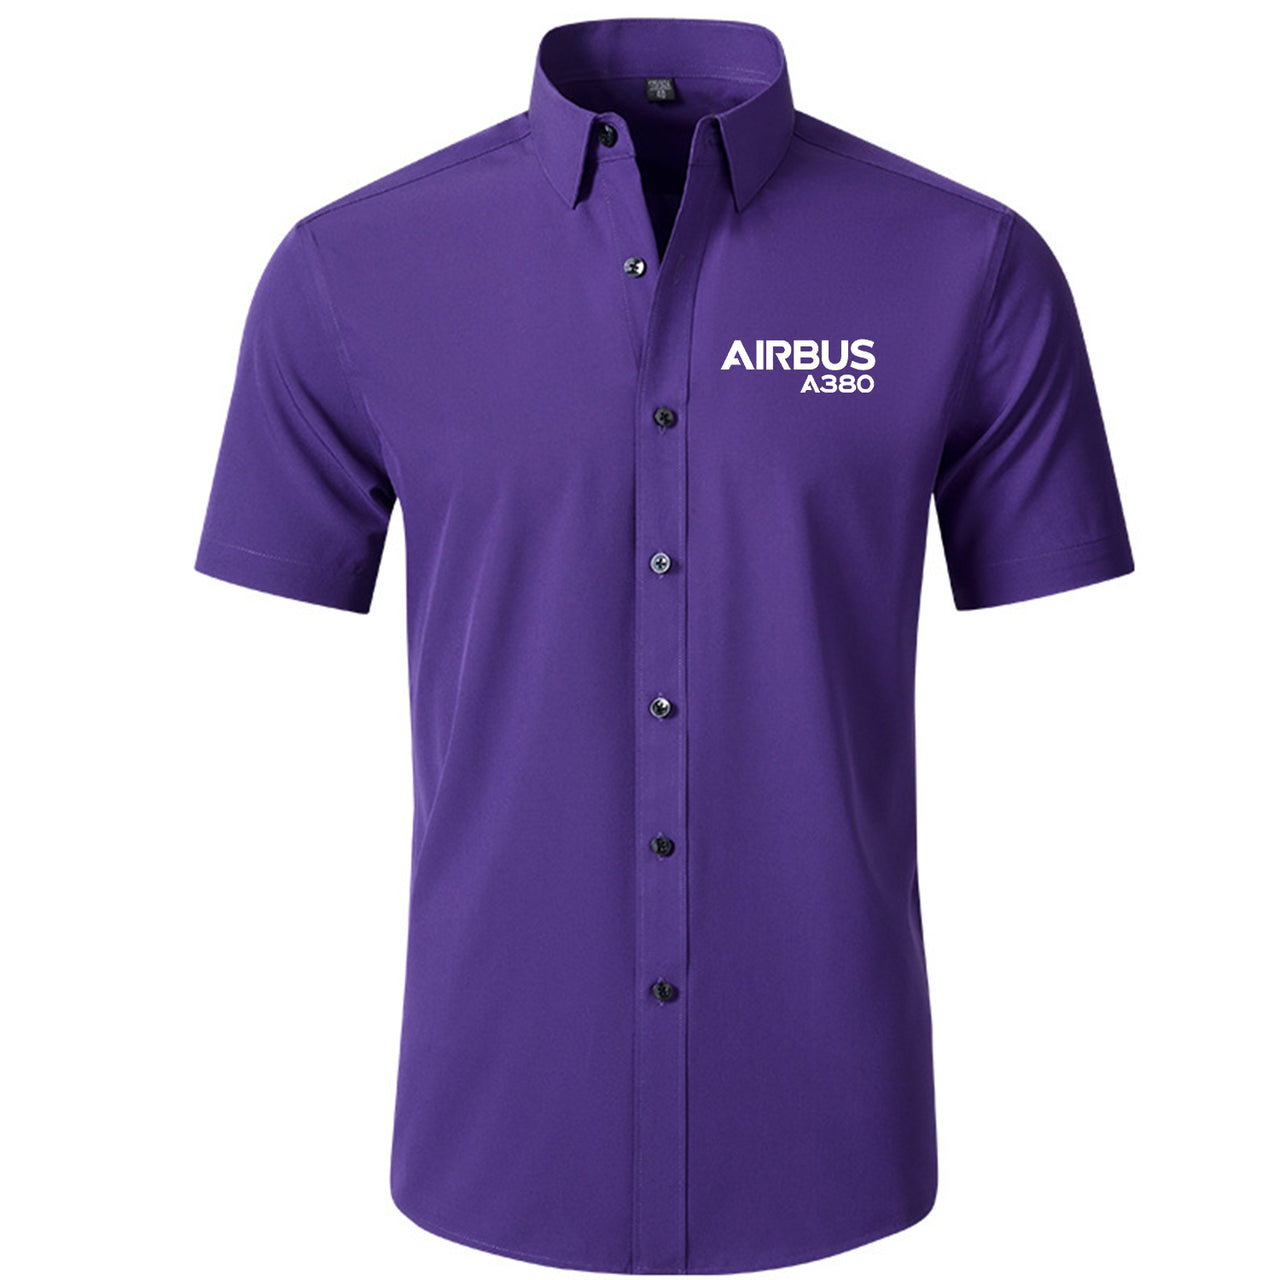 Airbus A380 & Text Designed Short Sleeve Shirts